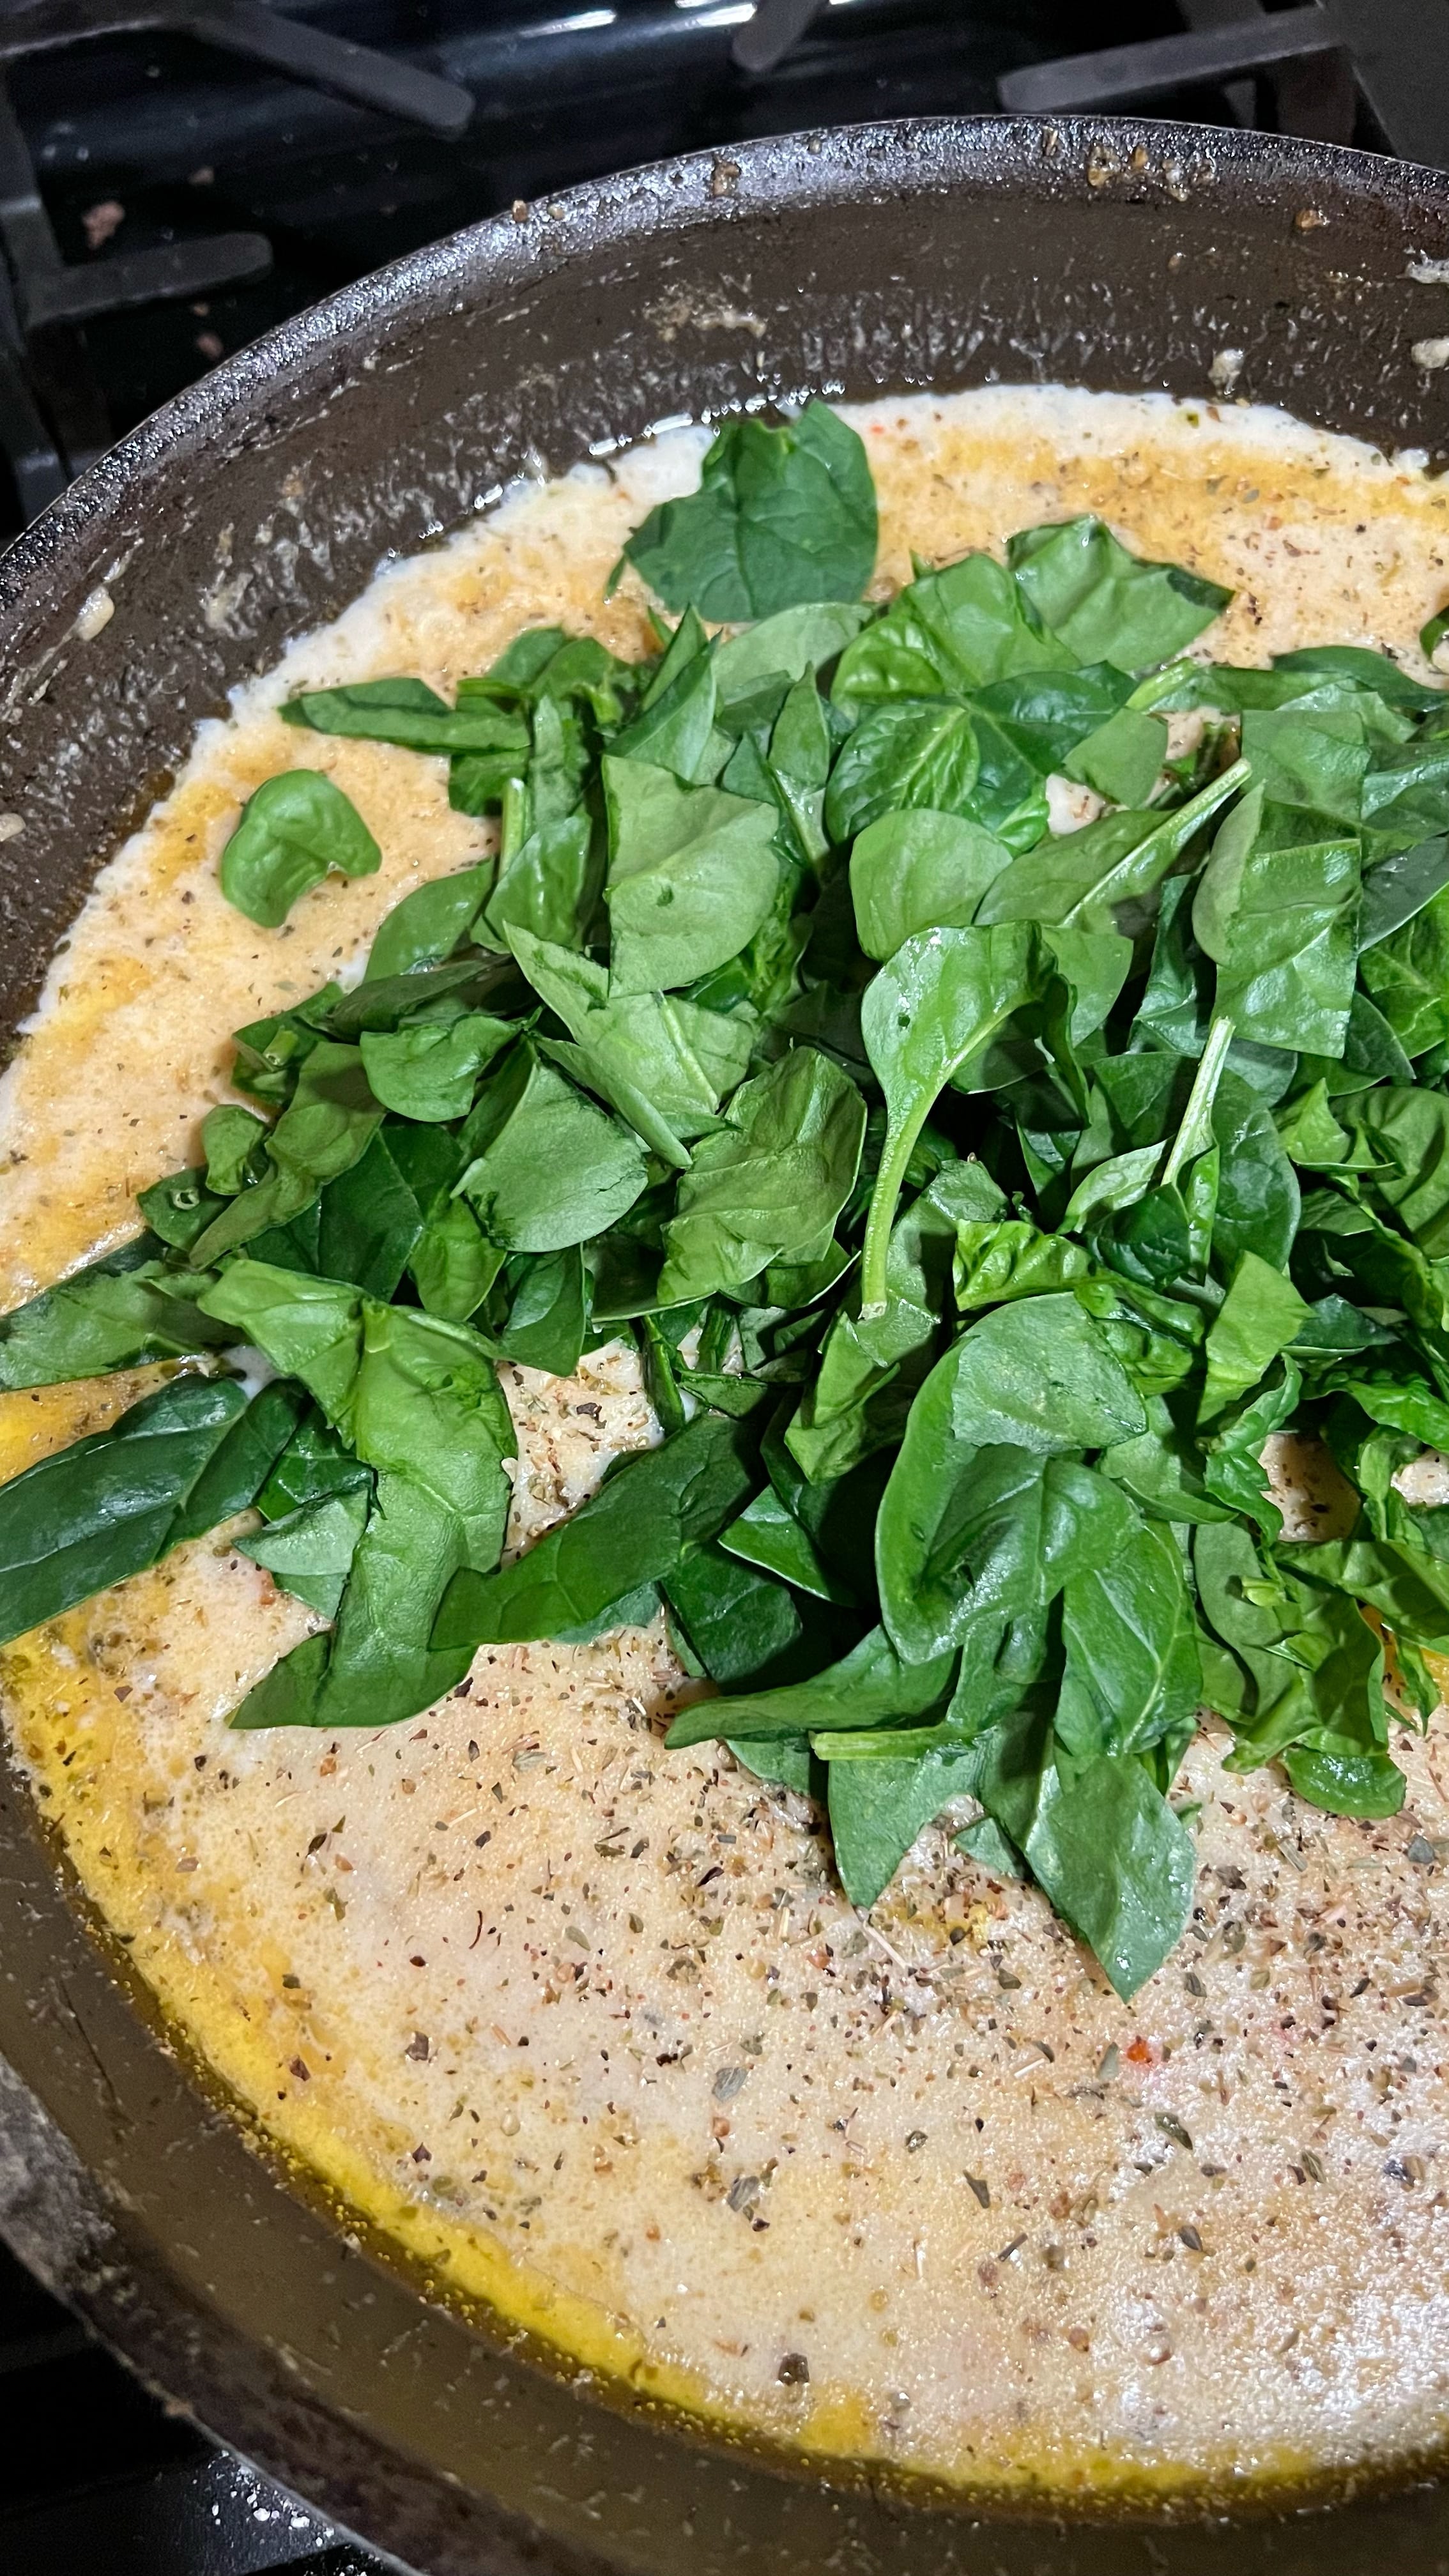 Spinach added to tuscan chicken sauce.